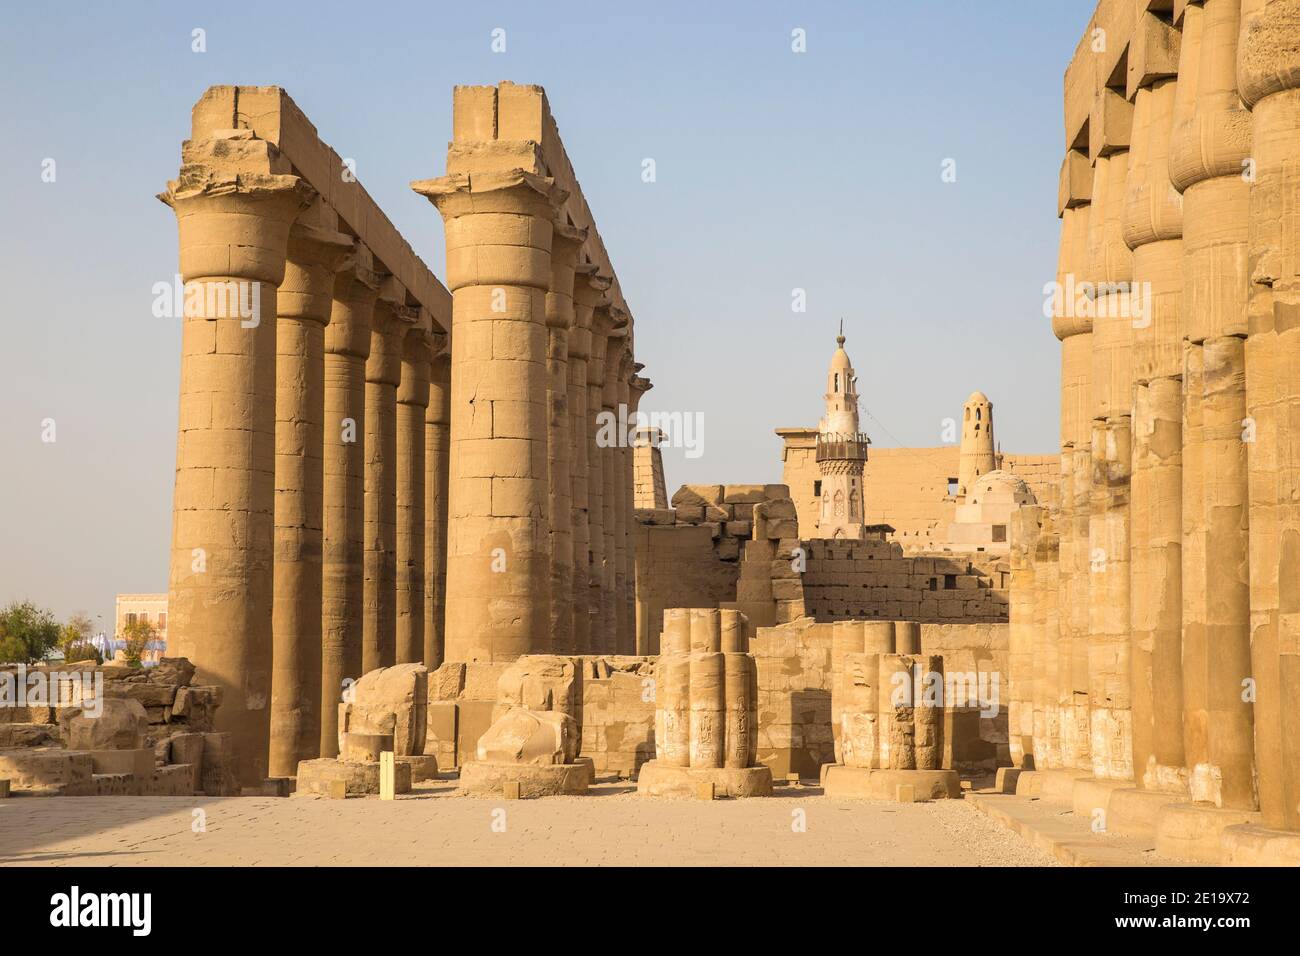 Egypt, Luxor, Luxor Temple, the Great colonnade of Amenophis 11, and to the right The ancient mosque of Abu Al Haggag Stock Photo